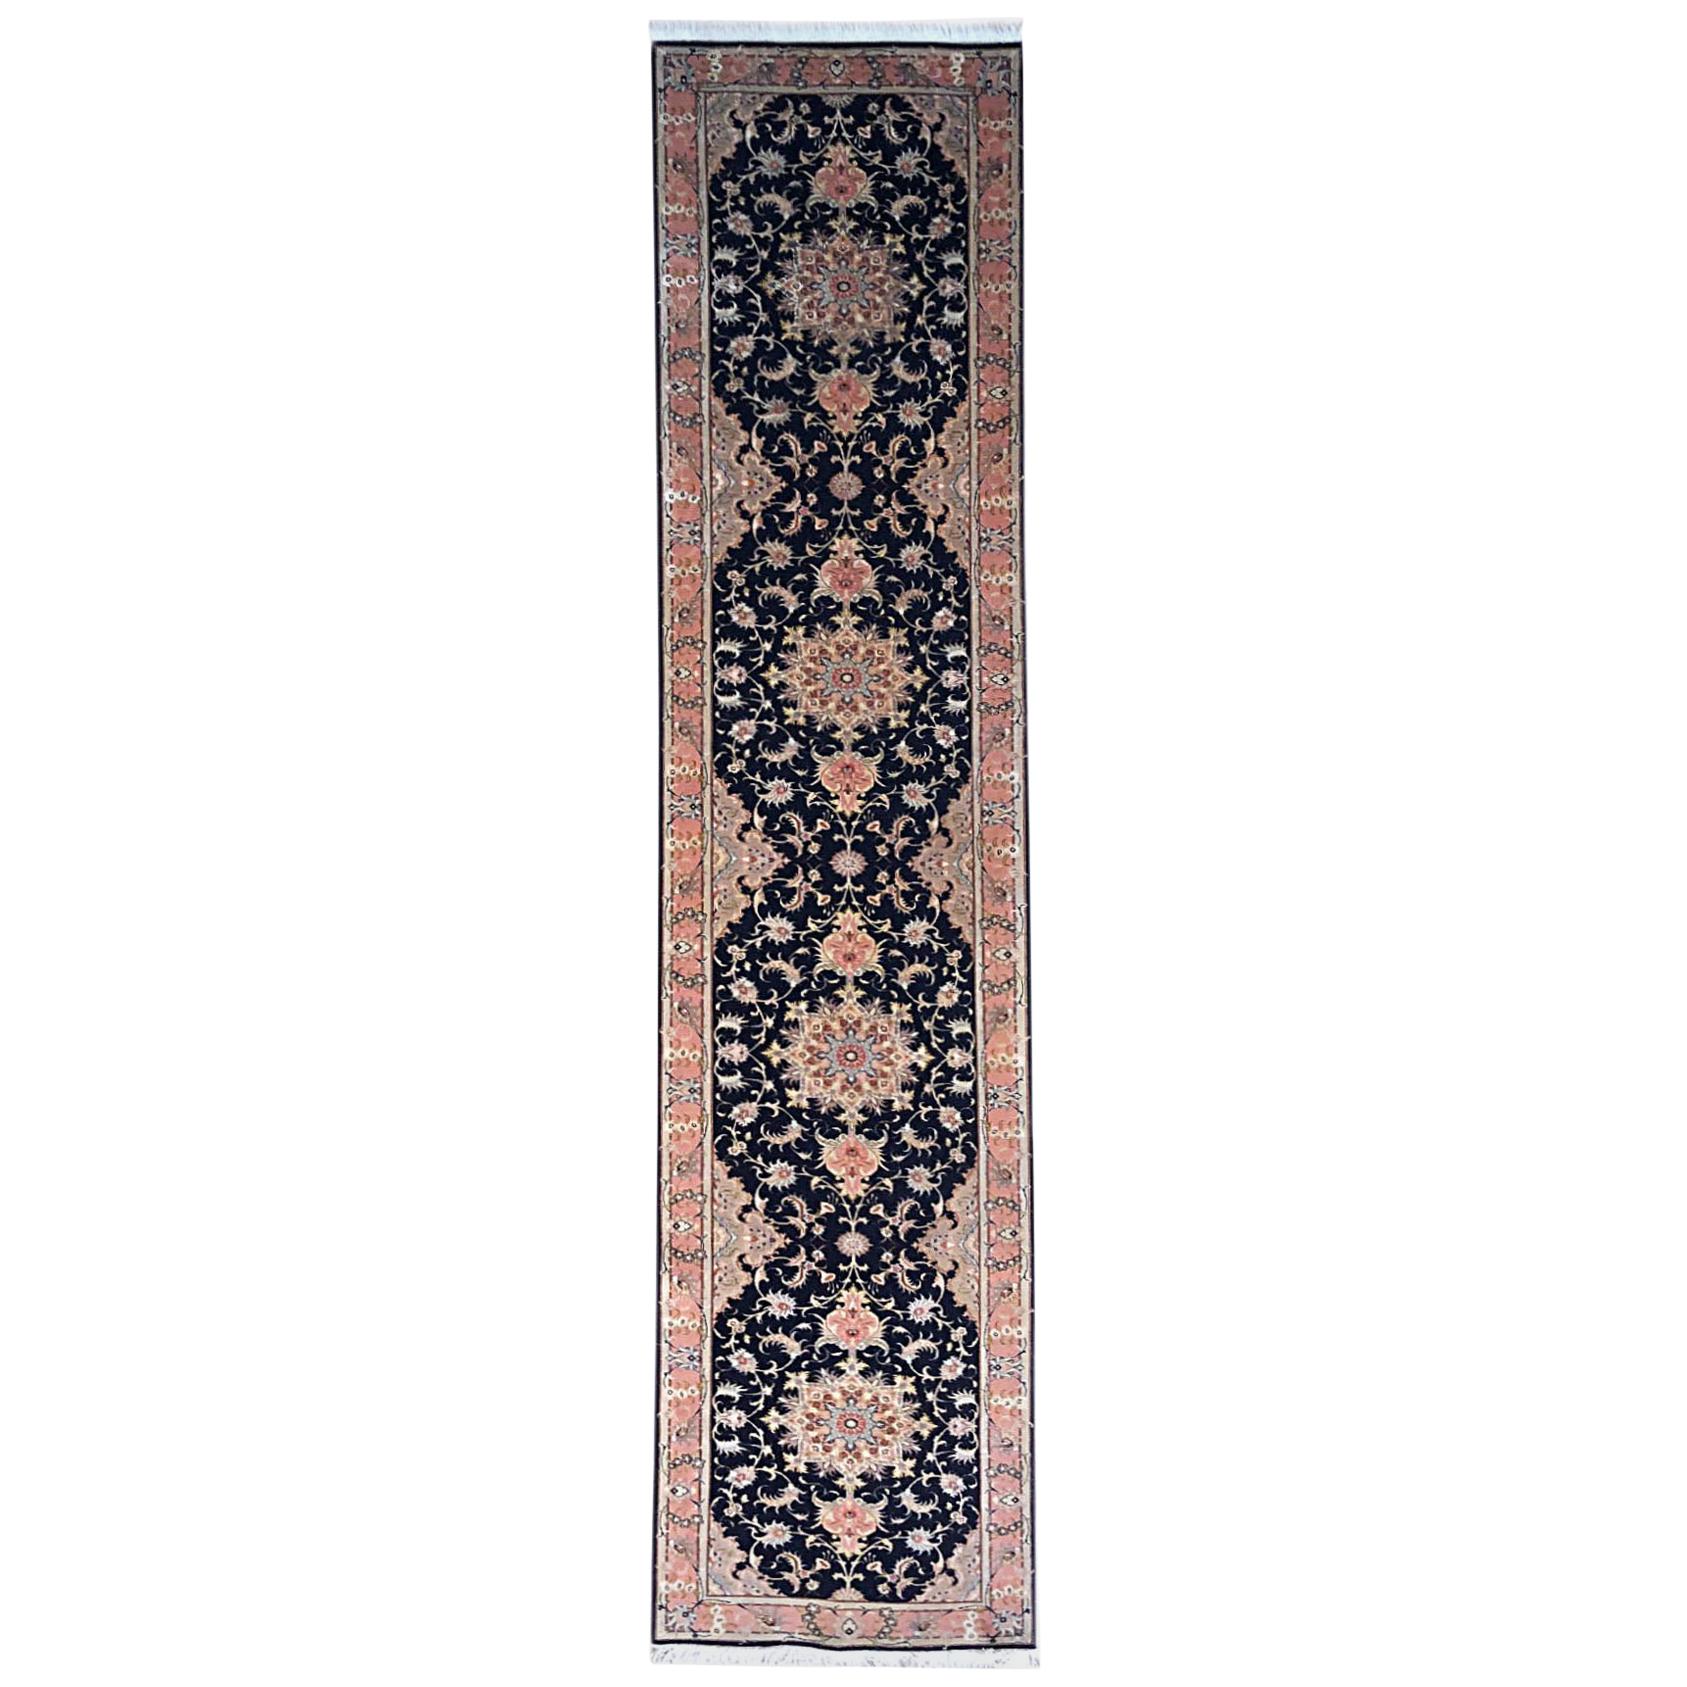 Authentic Persian Hand Knotted Repeated Medallion Floral Tabriz Black Runner Rug